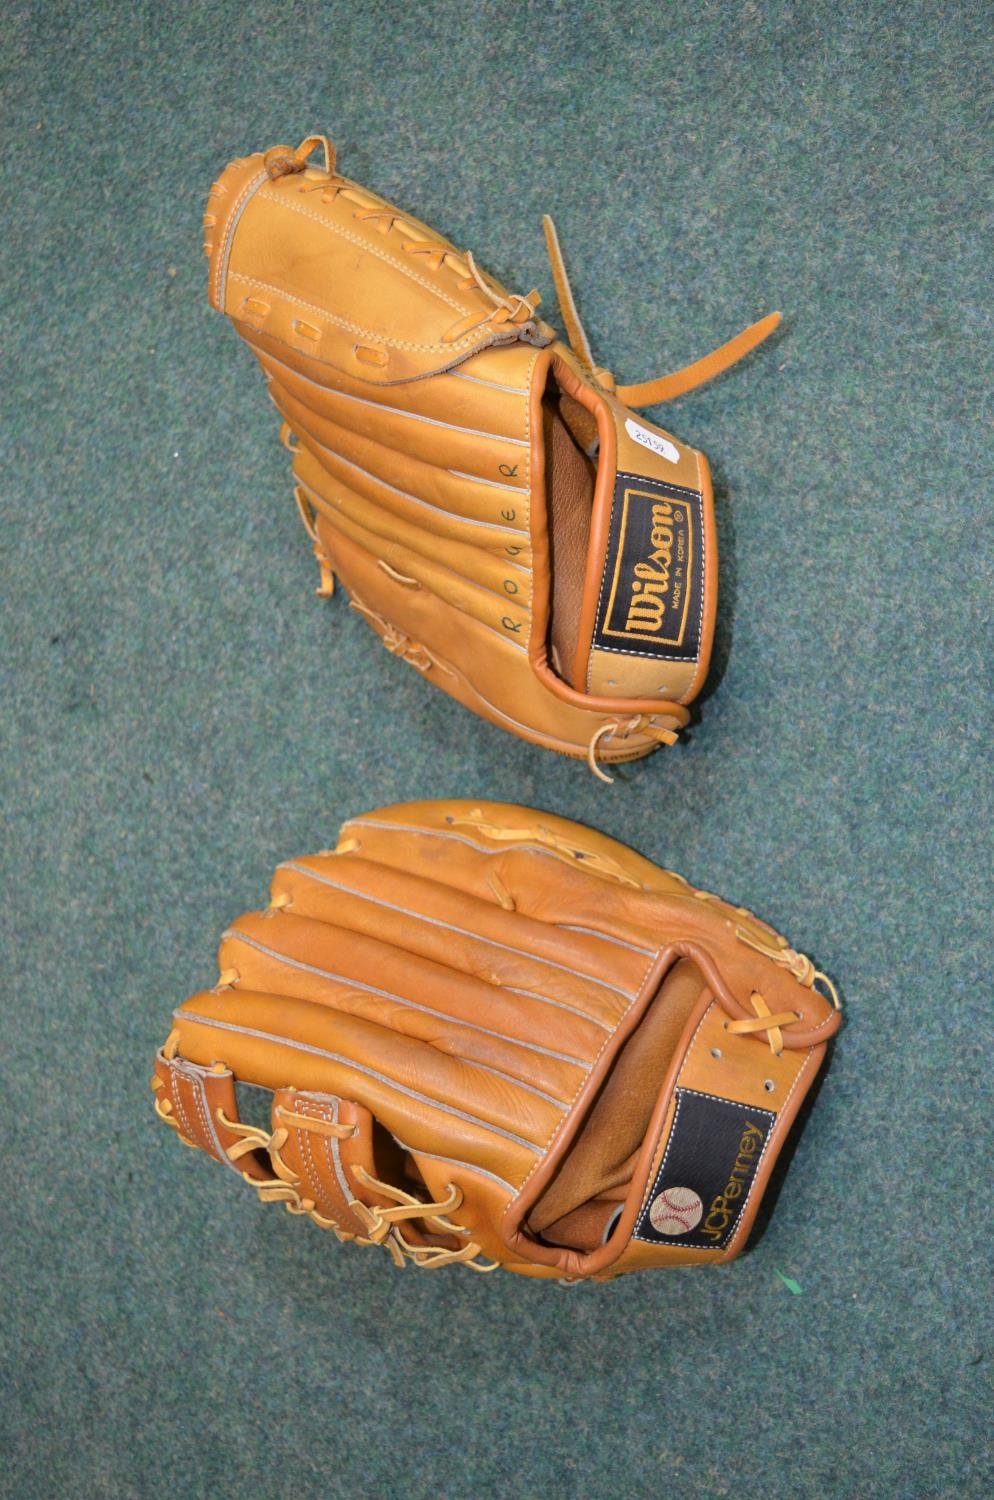 Two baseball gloves, one by JC Penny, one by Wilson